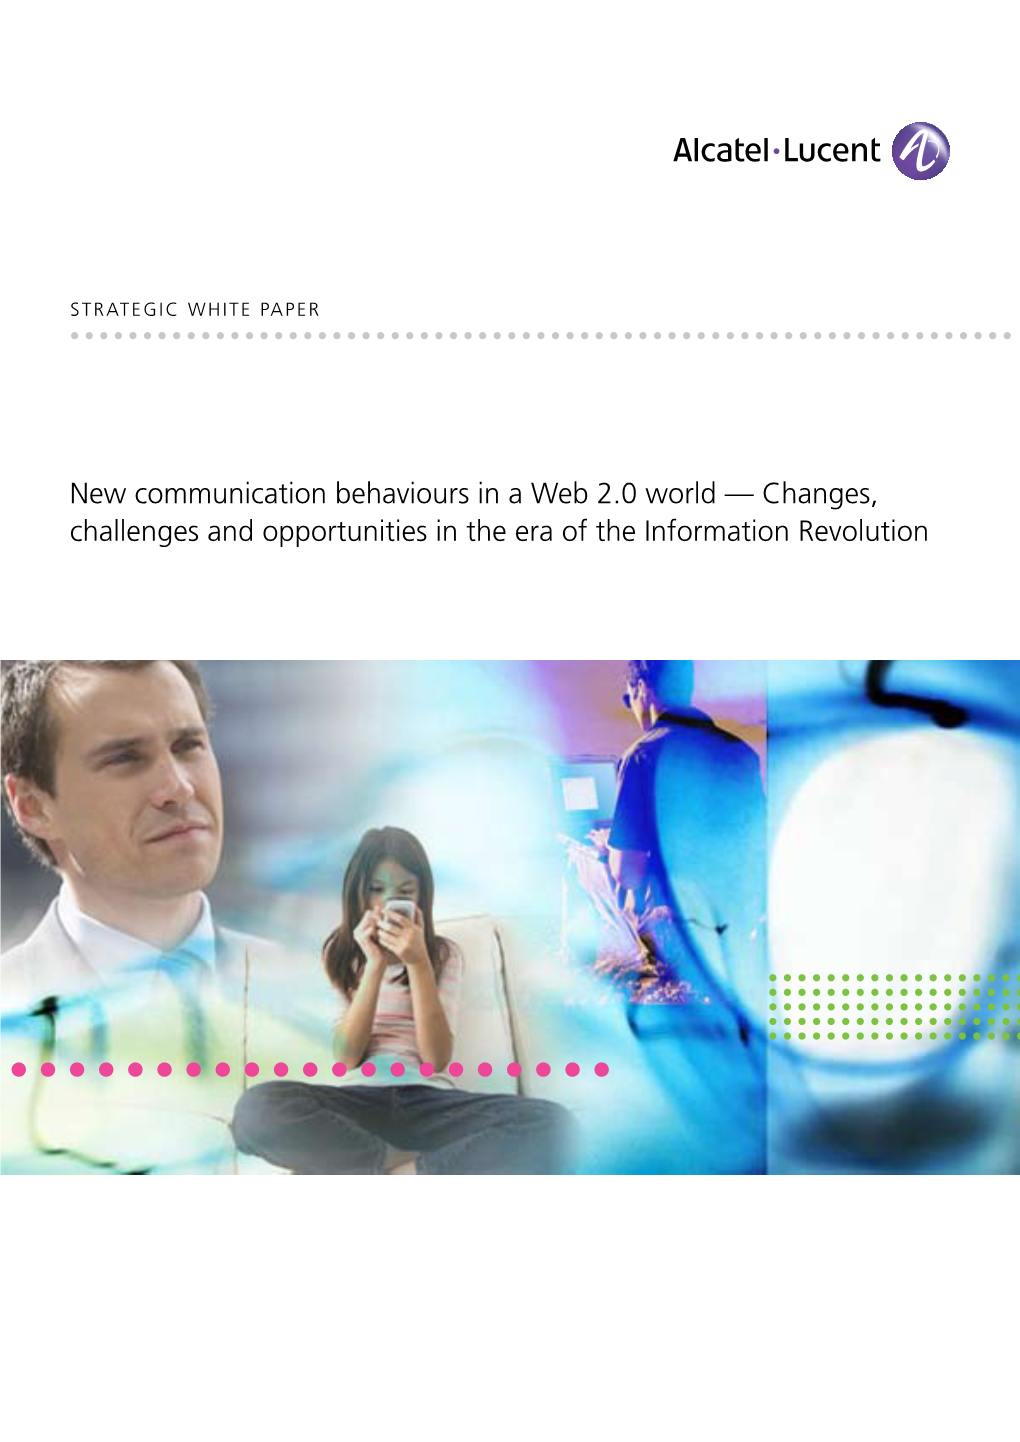 New Communication Behaviours in a Web 2.0 World — Changes, Challenges and Opportunities in the Era of the Information Revolution Table of Contents